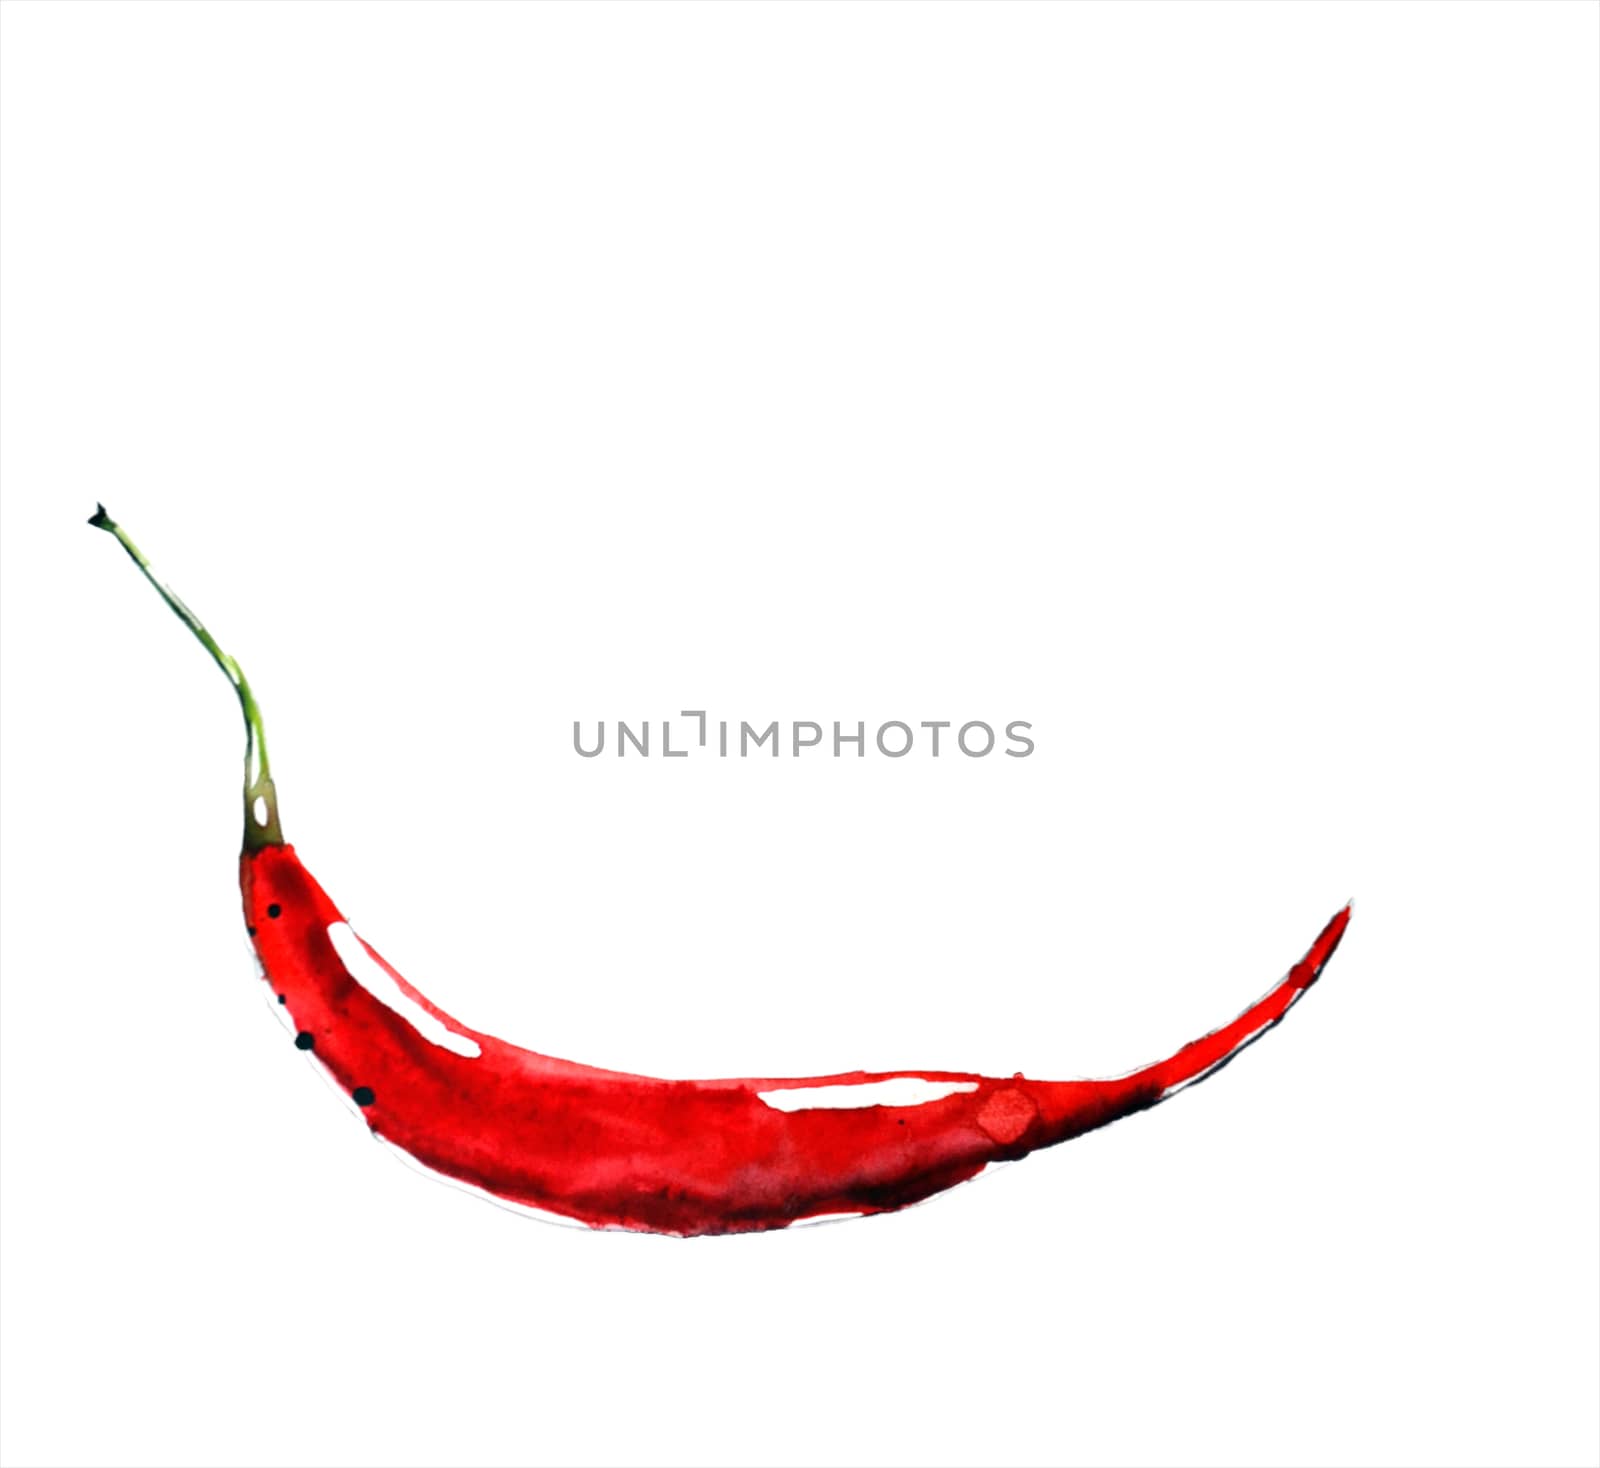 one chili pepper made of colorful splashes on white background